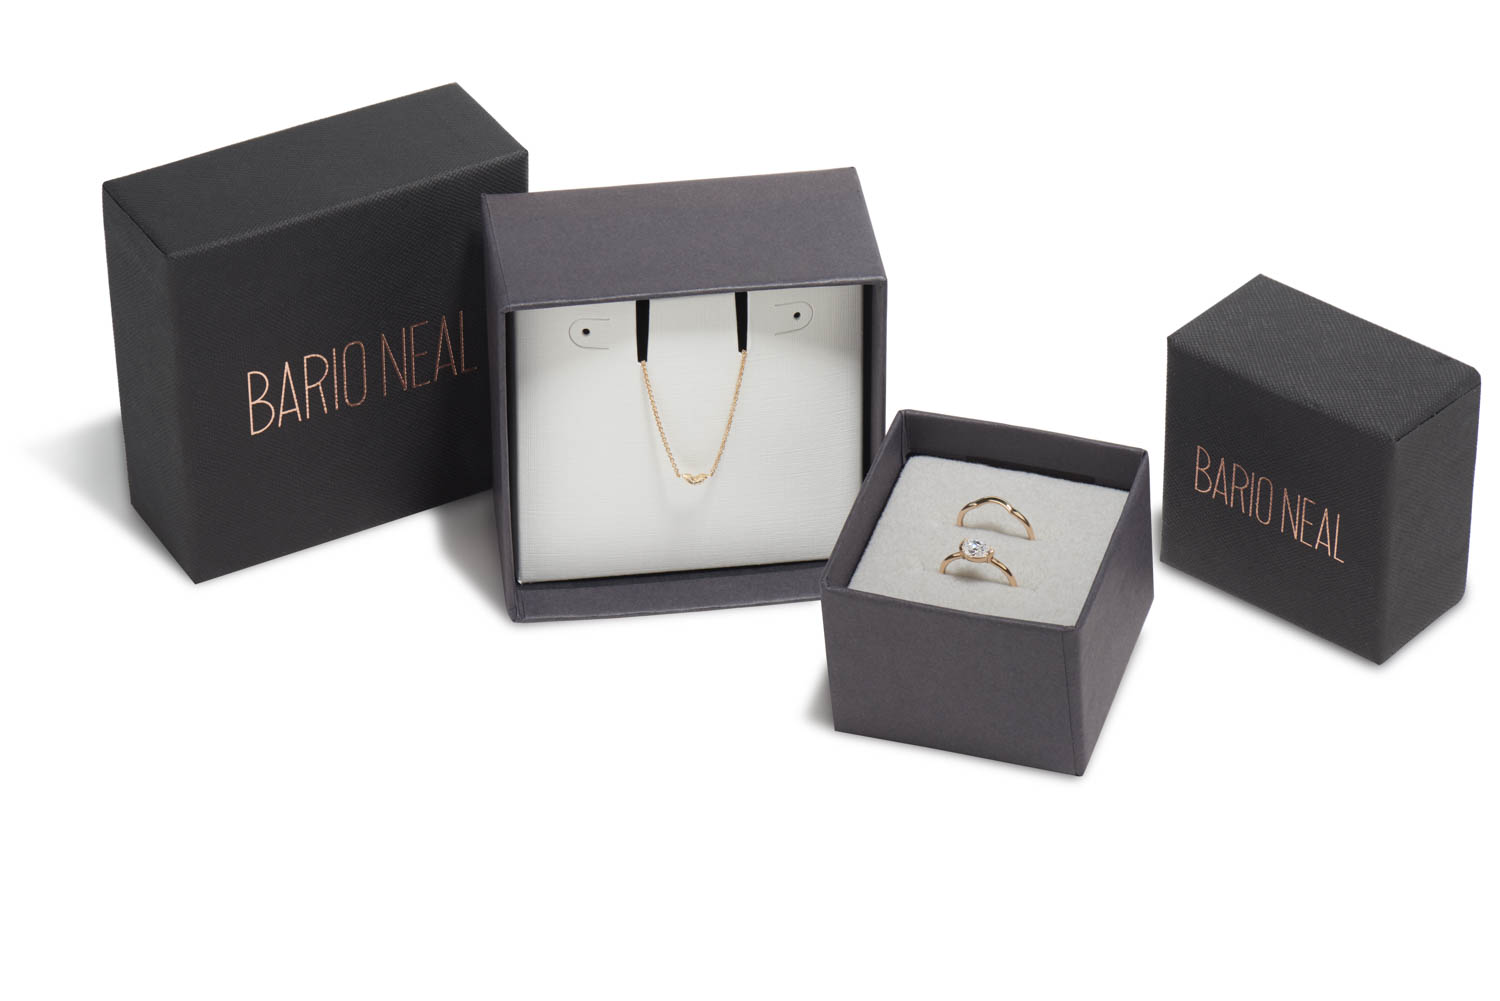 Two jewelry boxes placed aesthetically. One holds a diamond necklace; the other holds two rings. sustainable packaging